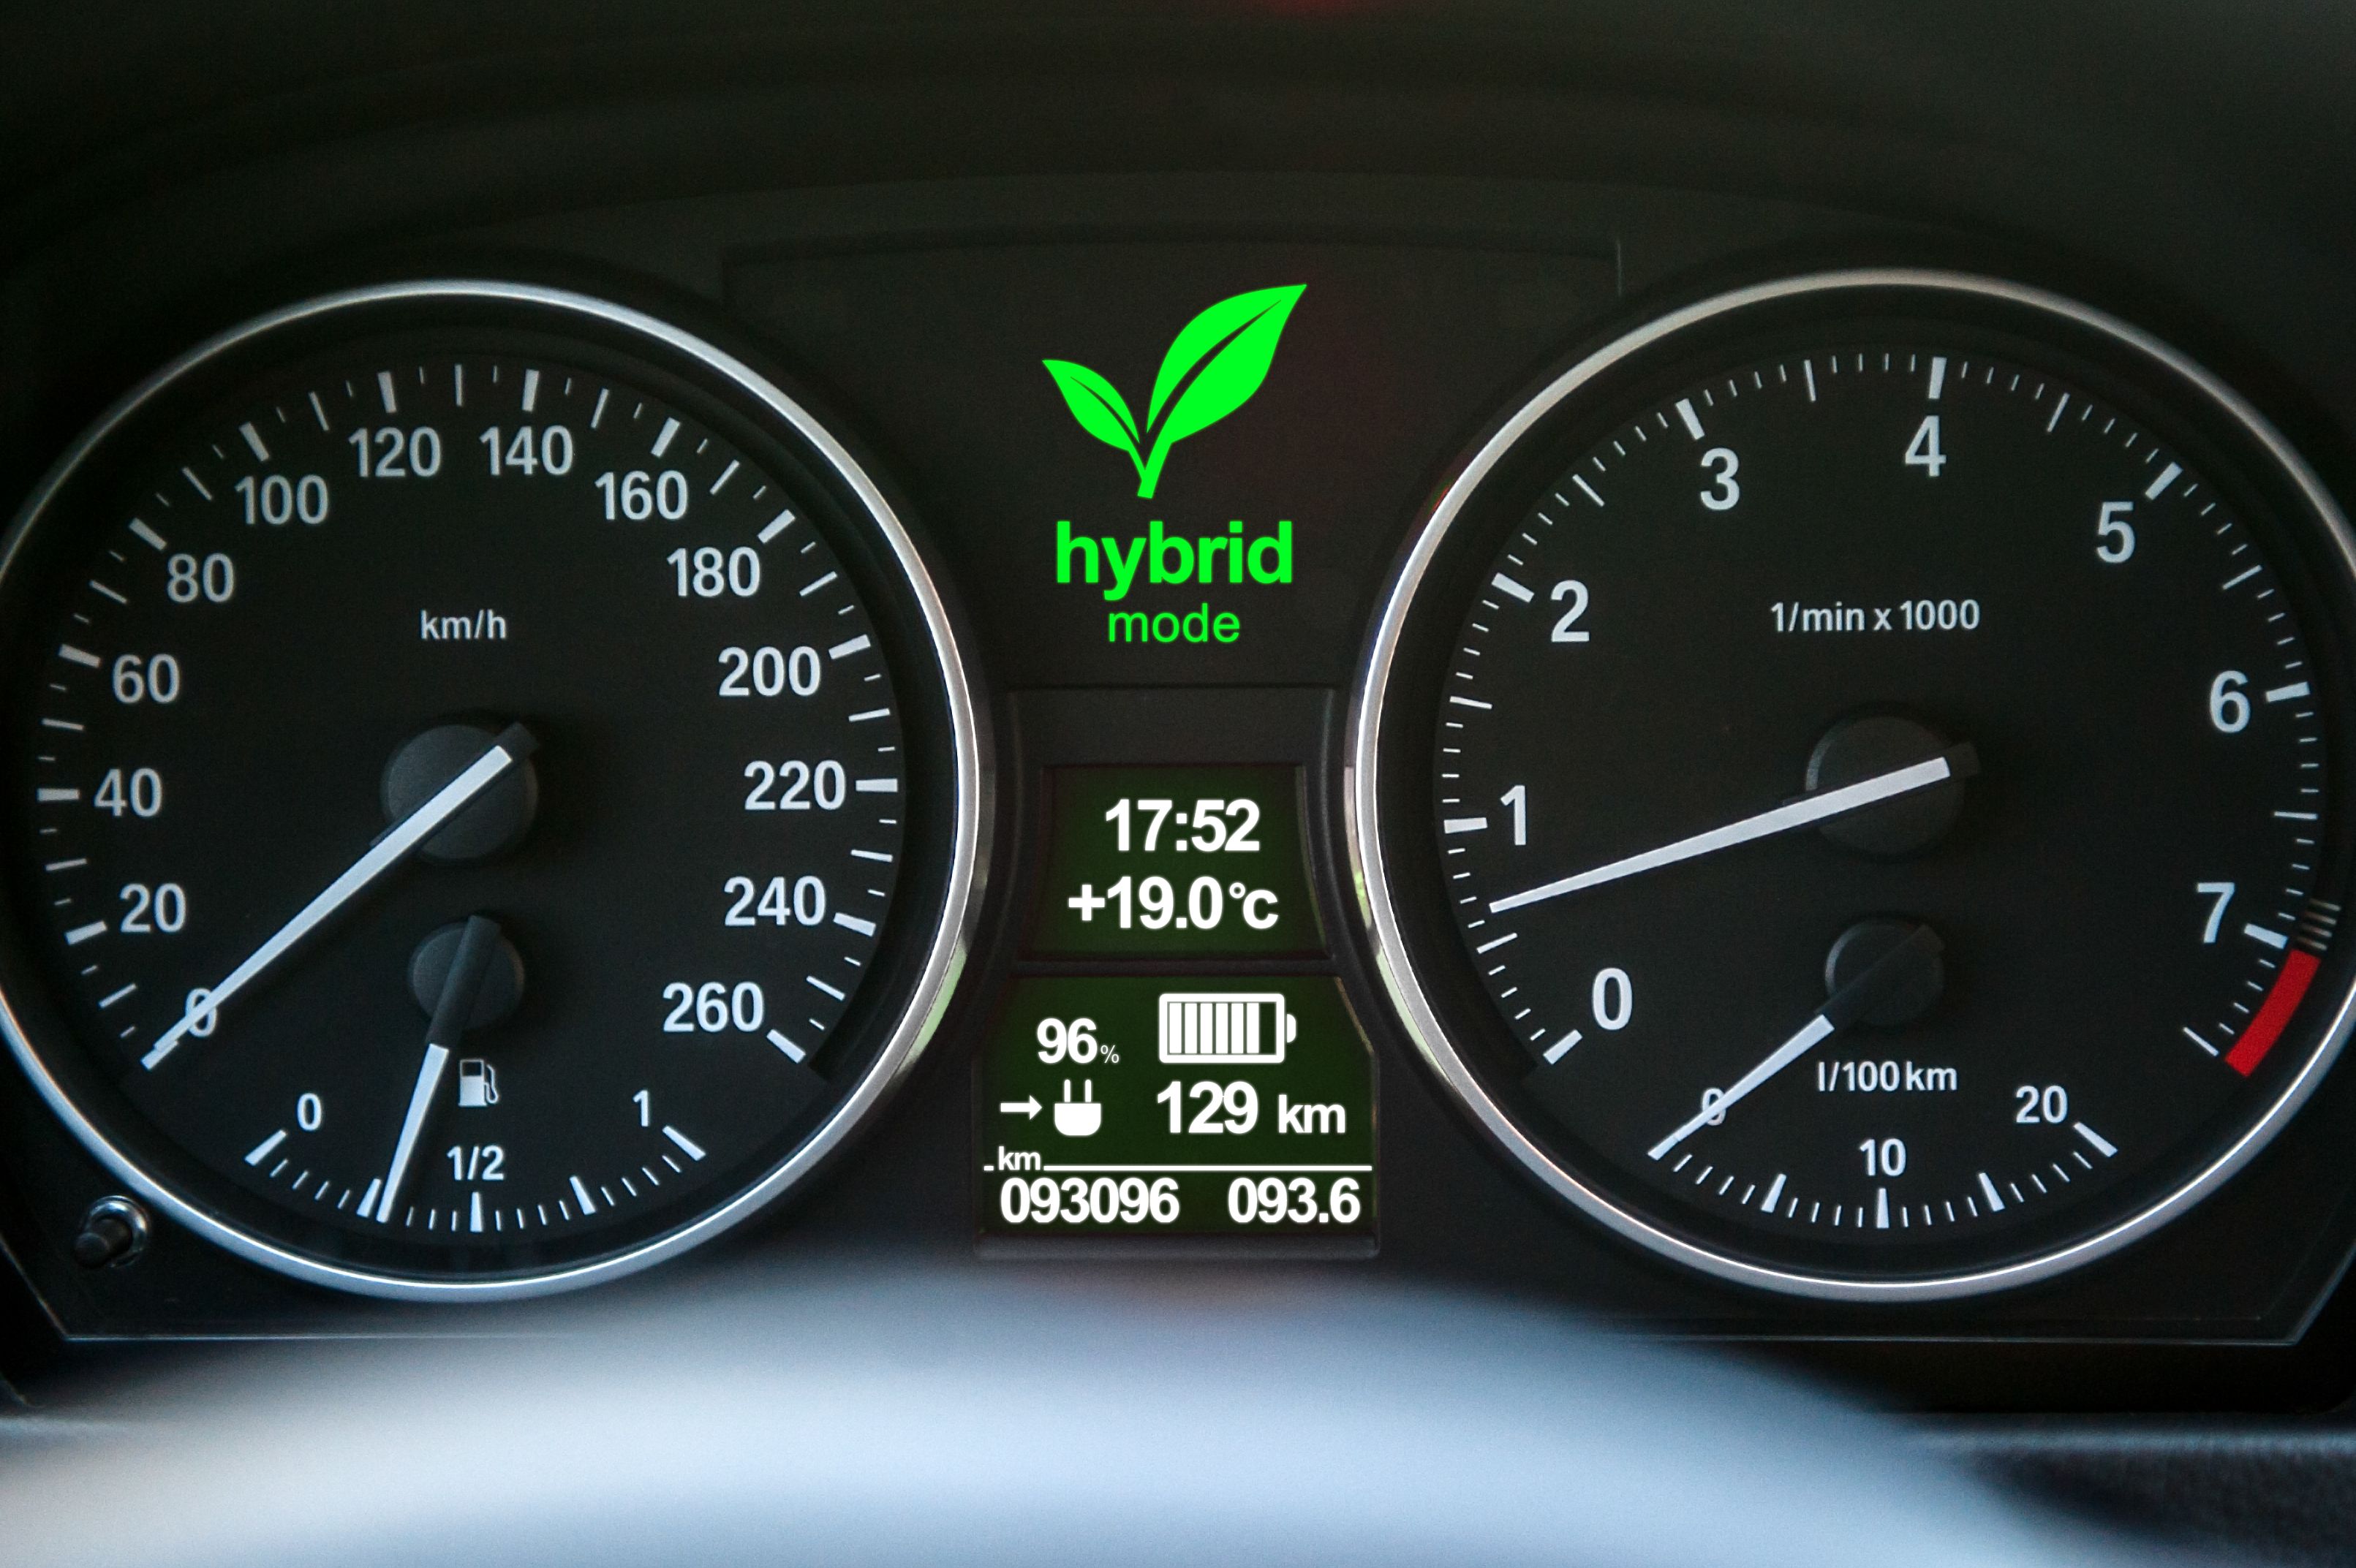 Closeup of a hybrid car's dashboard display with the "Hybrid Mode" light activated.